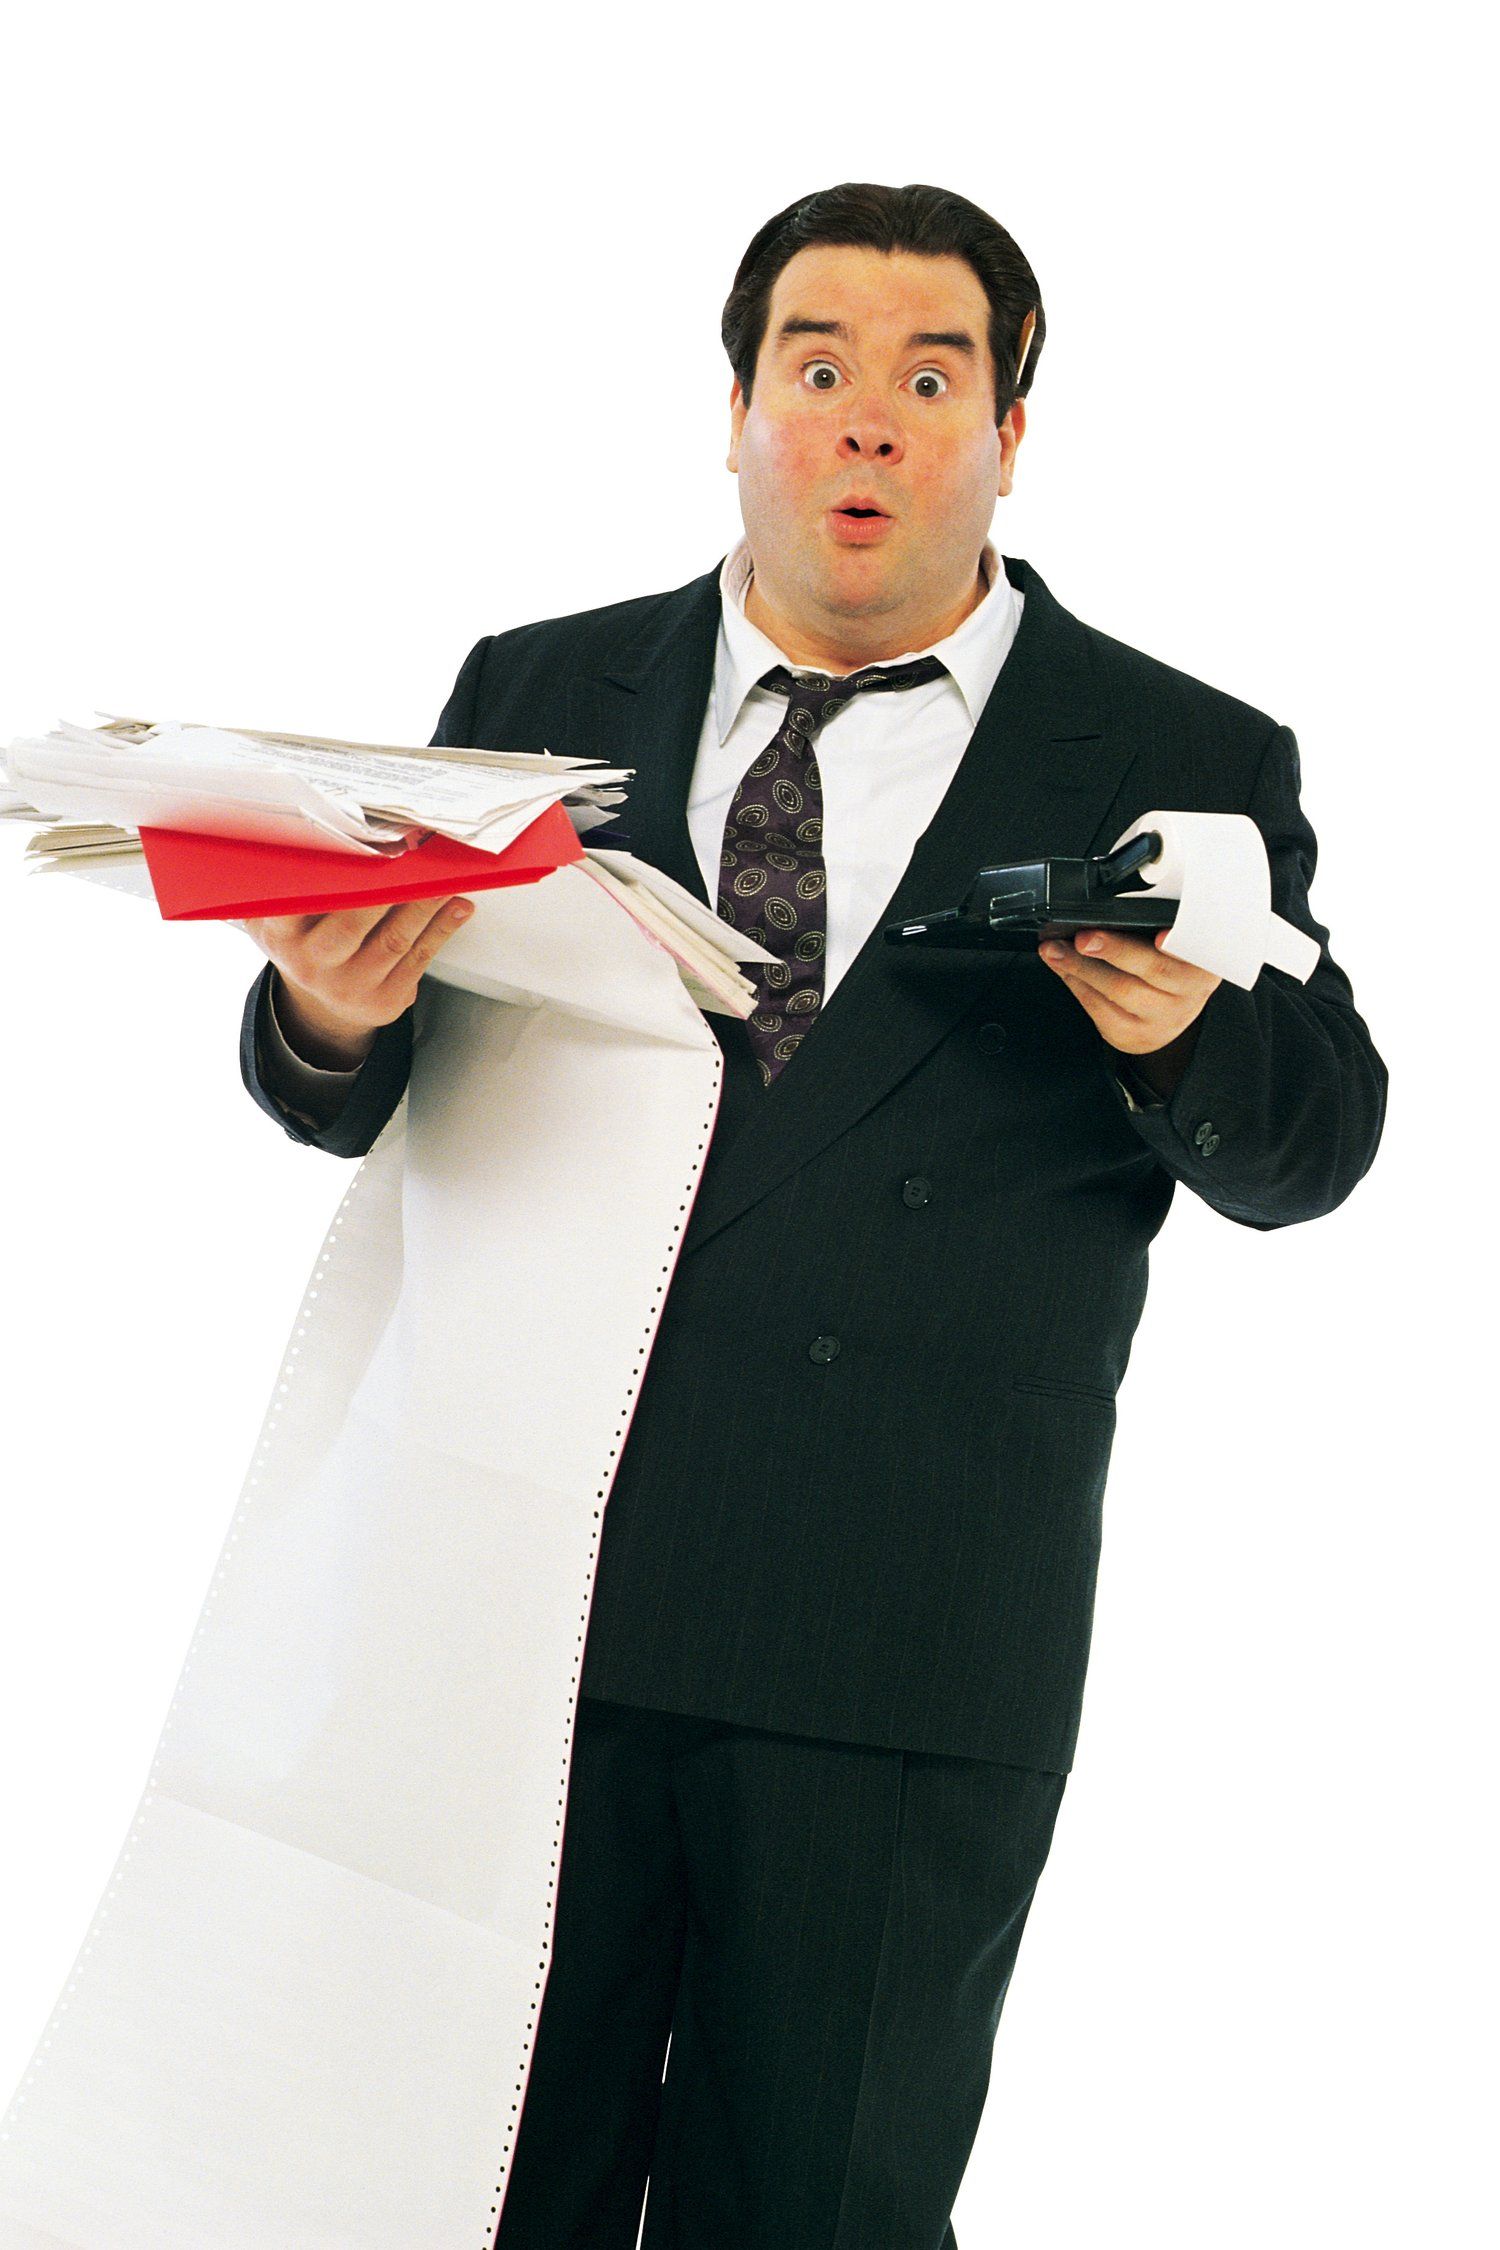 surprised man in suit with papers in hand